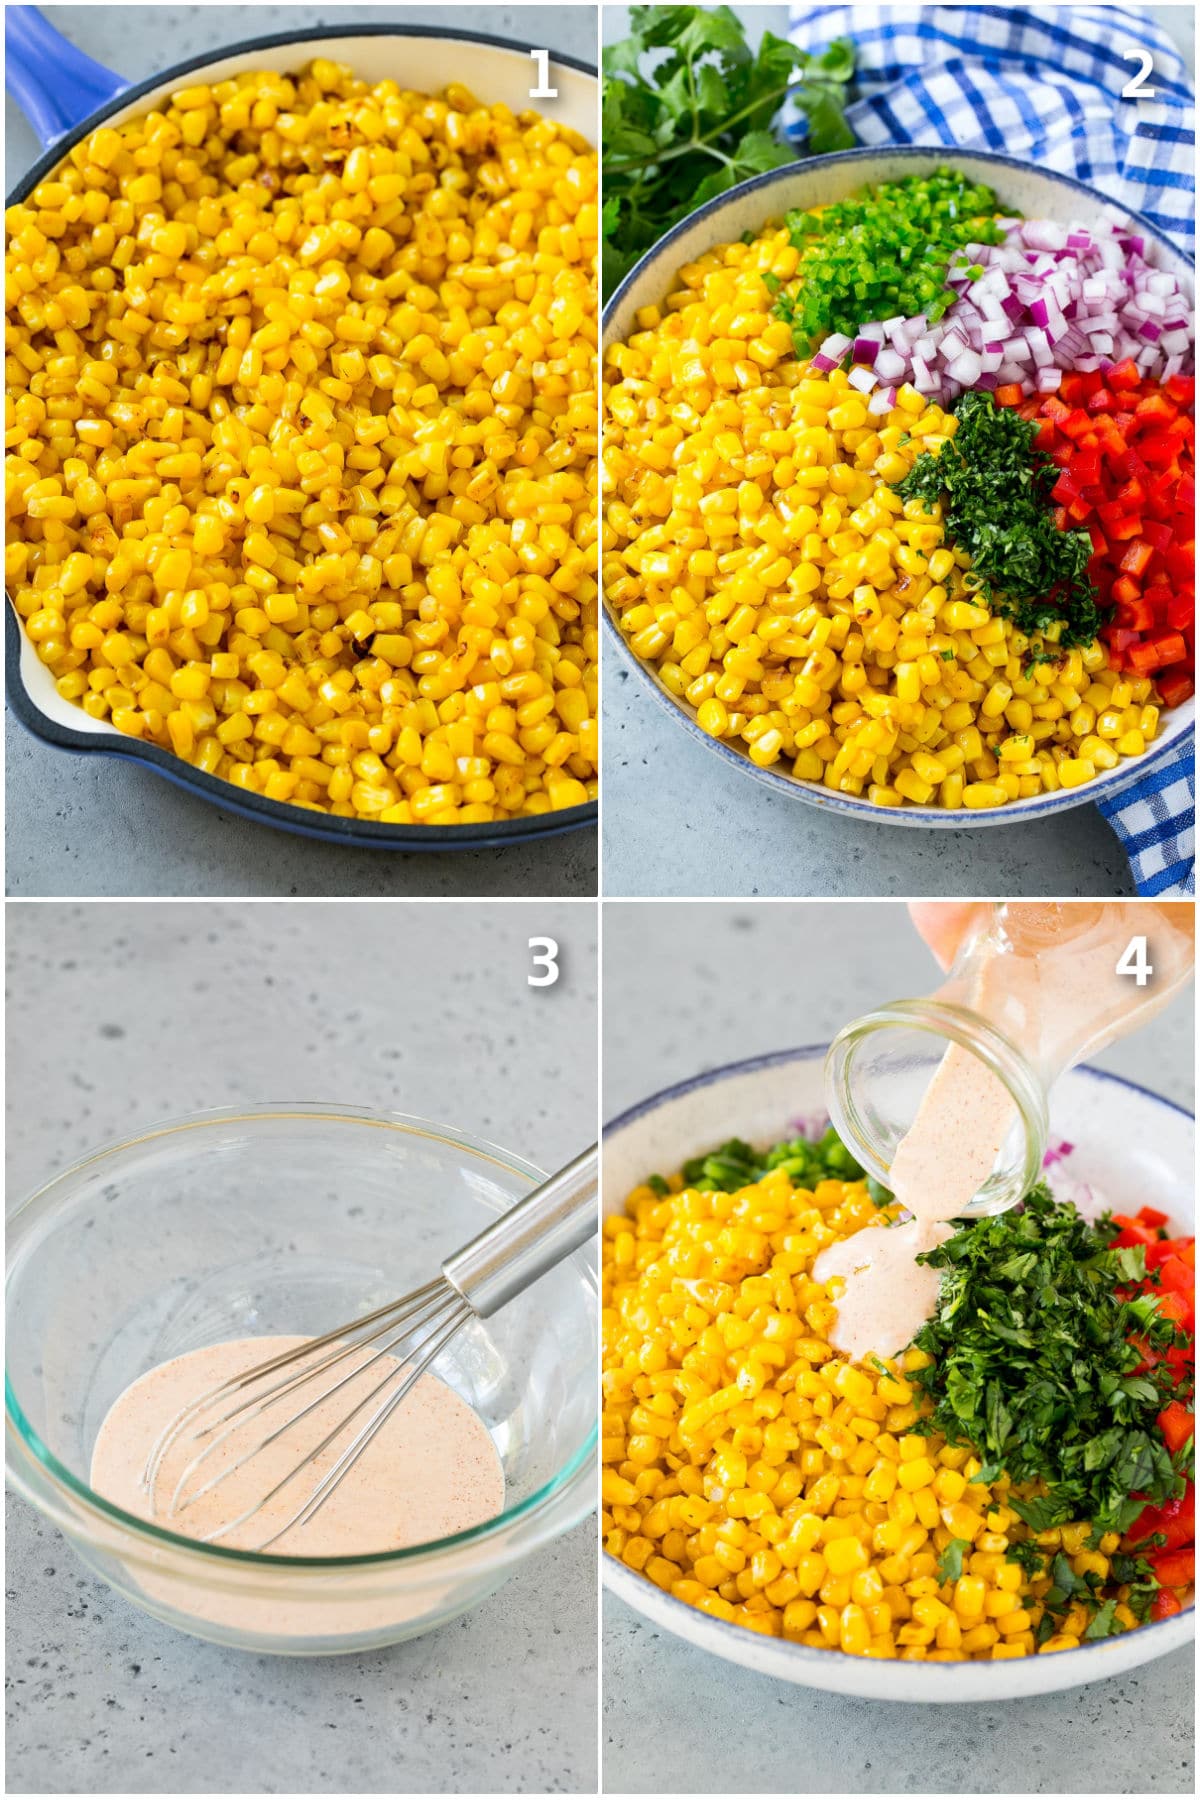 Step by step shots showing how to make Mexican corn salad.